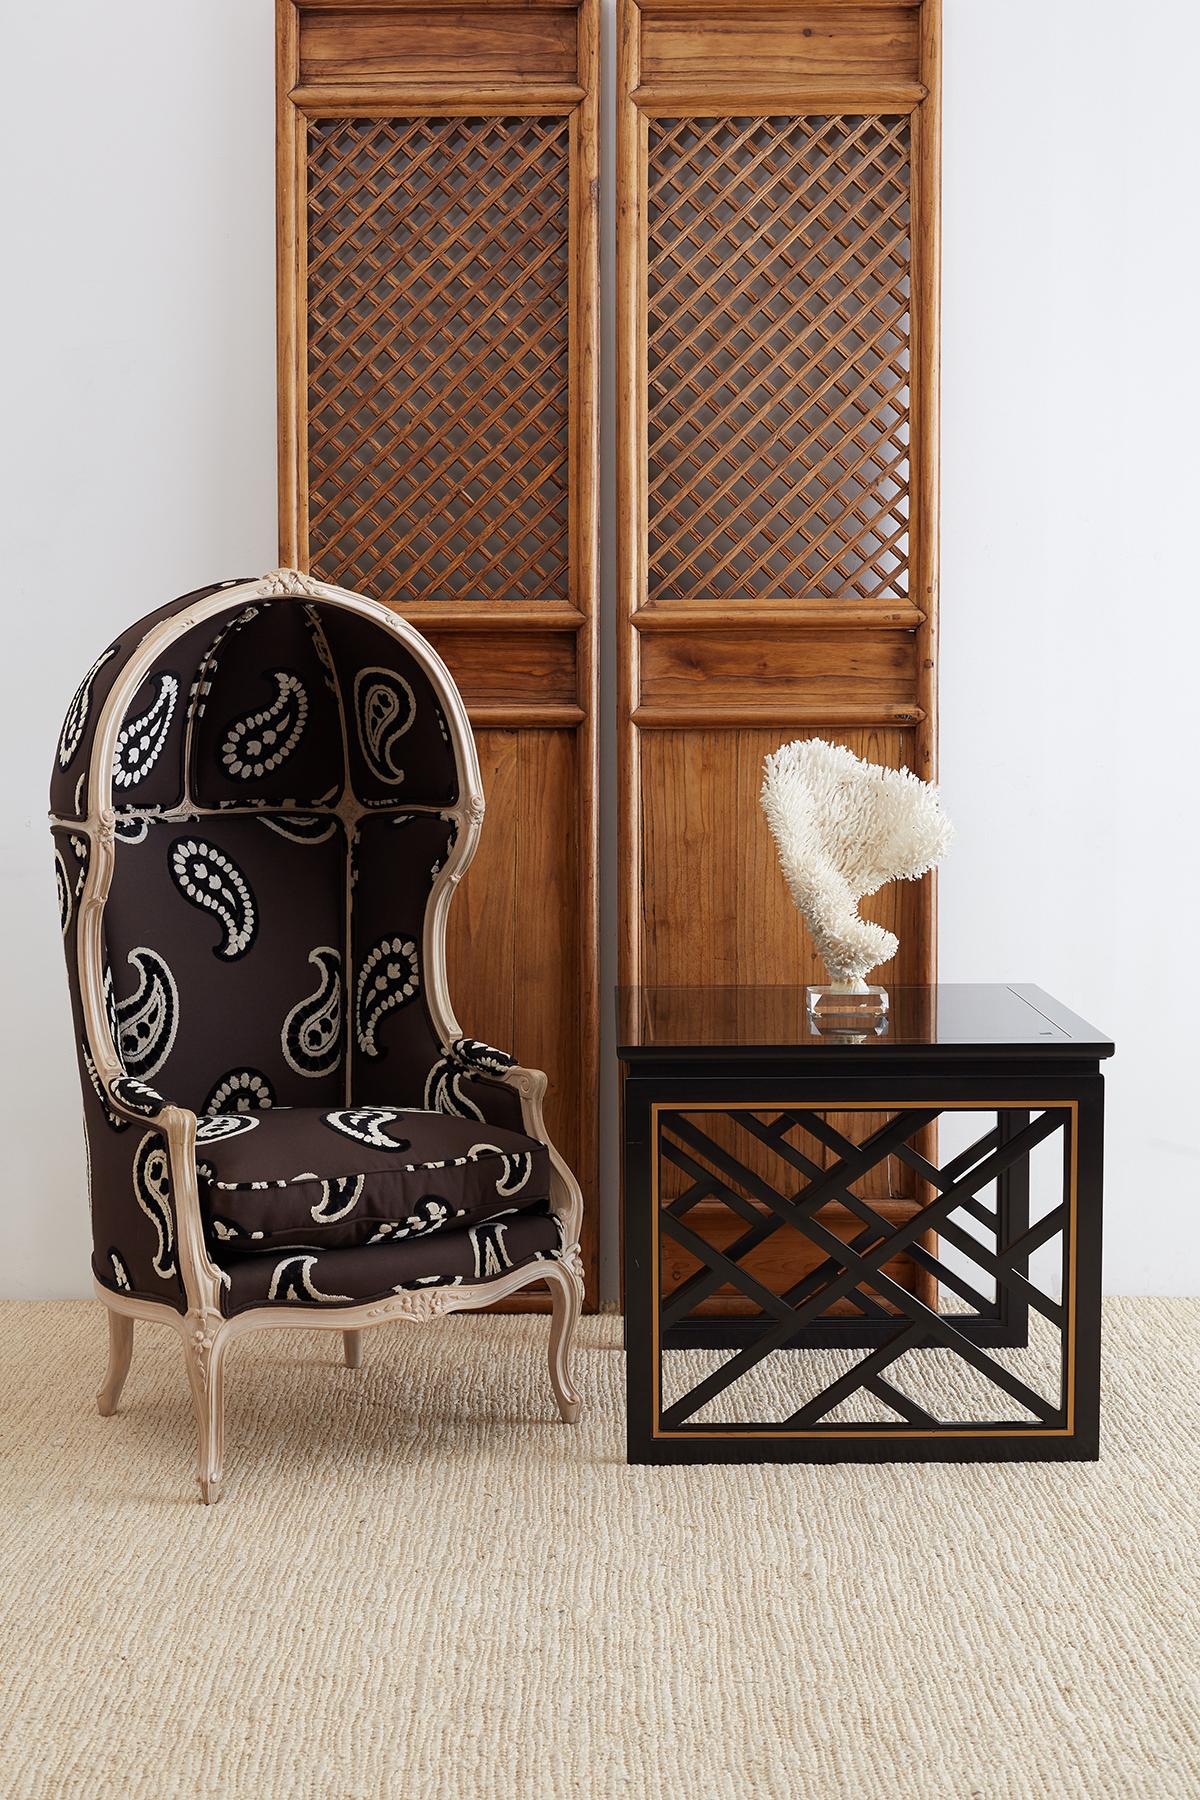 Stylish upholstered canopy chair or porter's chair featuring a head-carved painted frame crafted in the French Louis XV taste. This hooded canopy chair is upholstered in a funky-chic Paisley Chenille over a dark chocolate background. The frame is